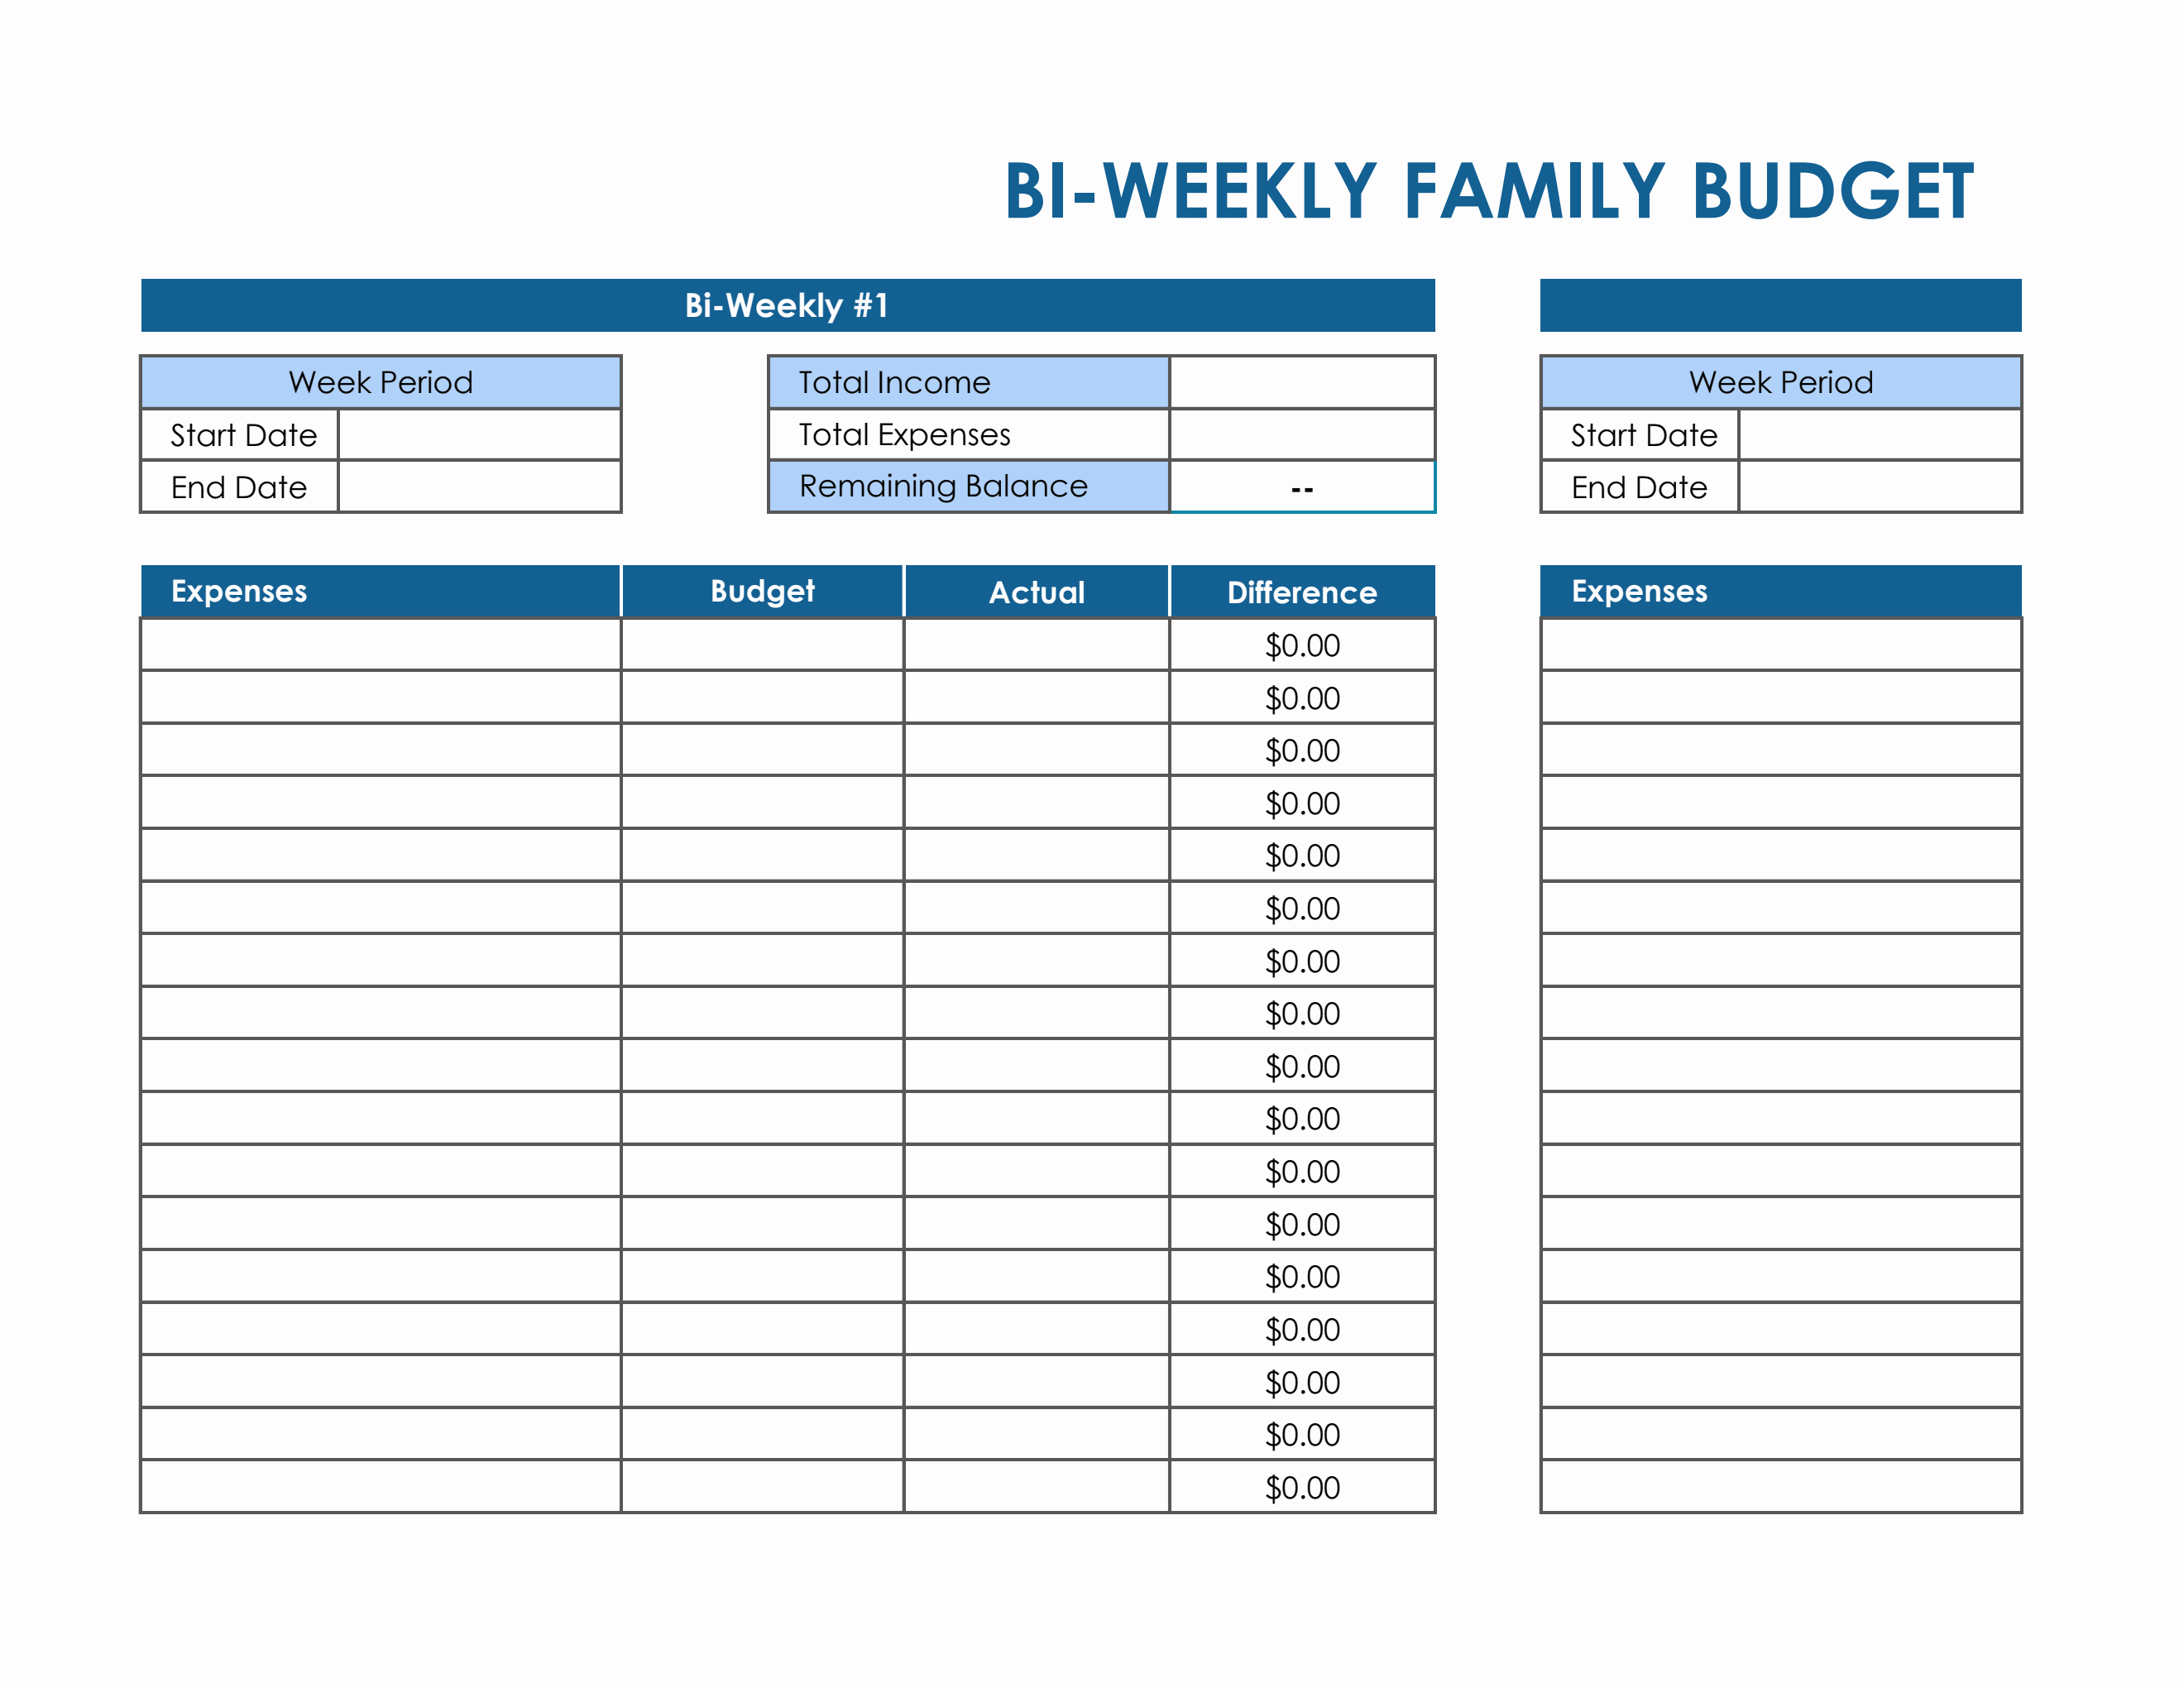 bi-weekly-family-budget-template-in-excel